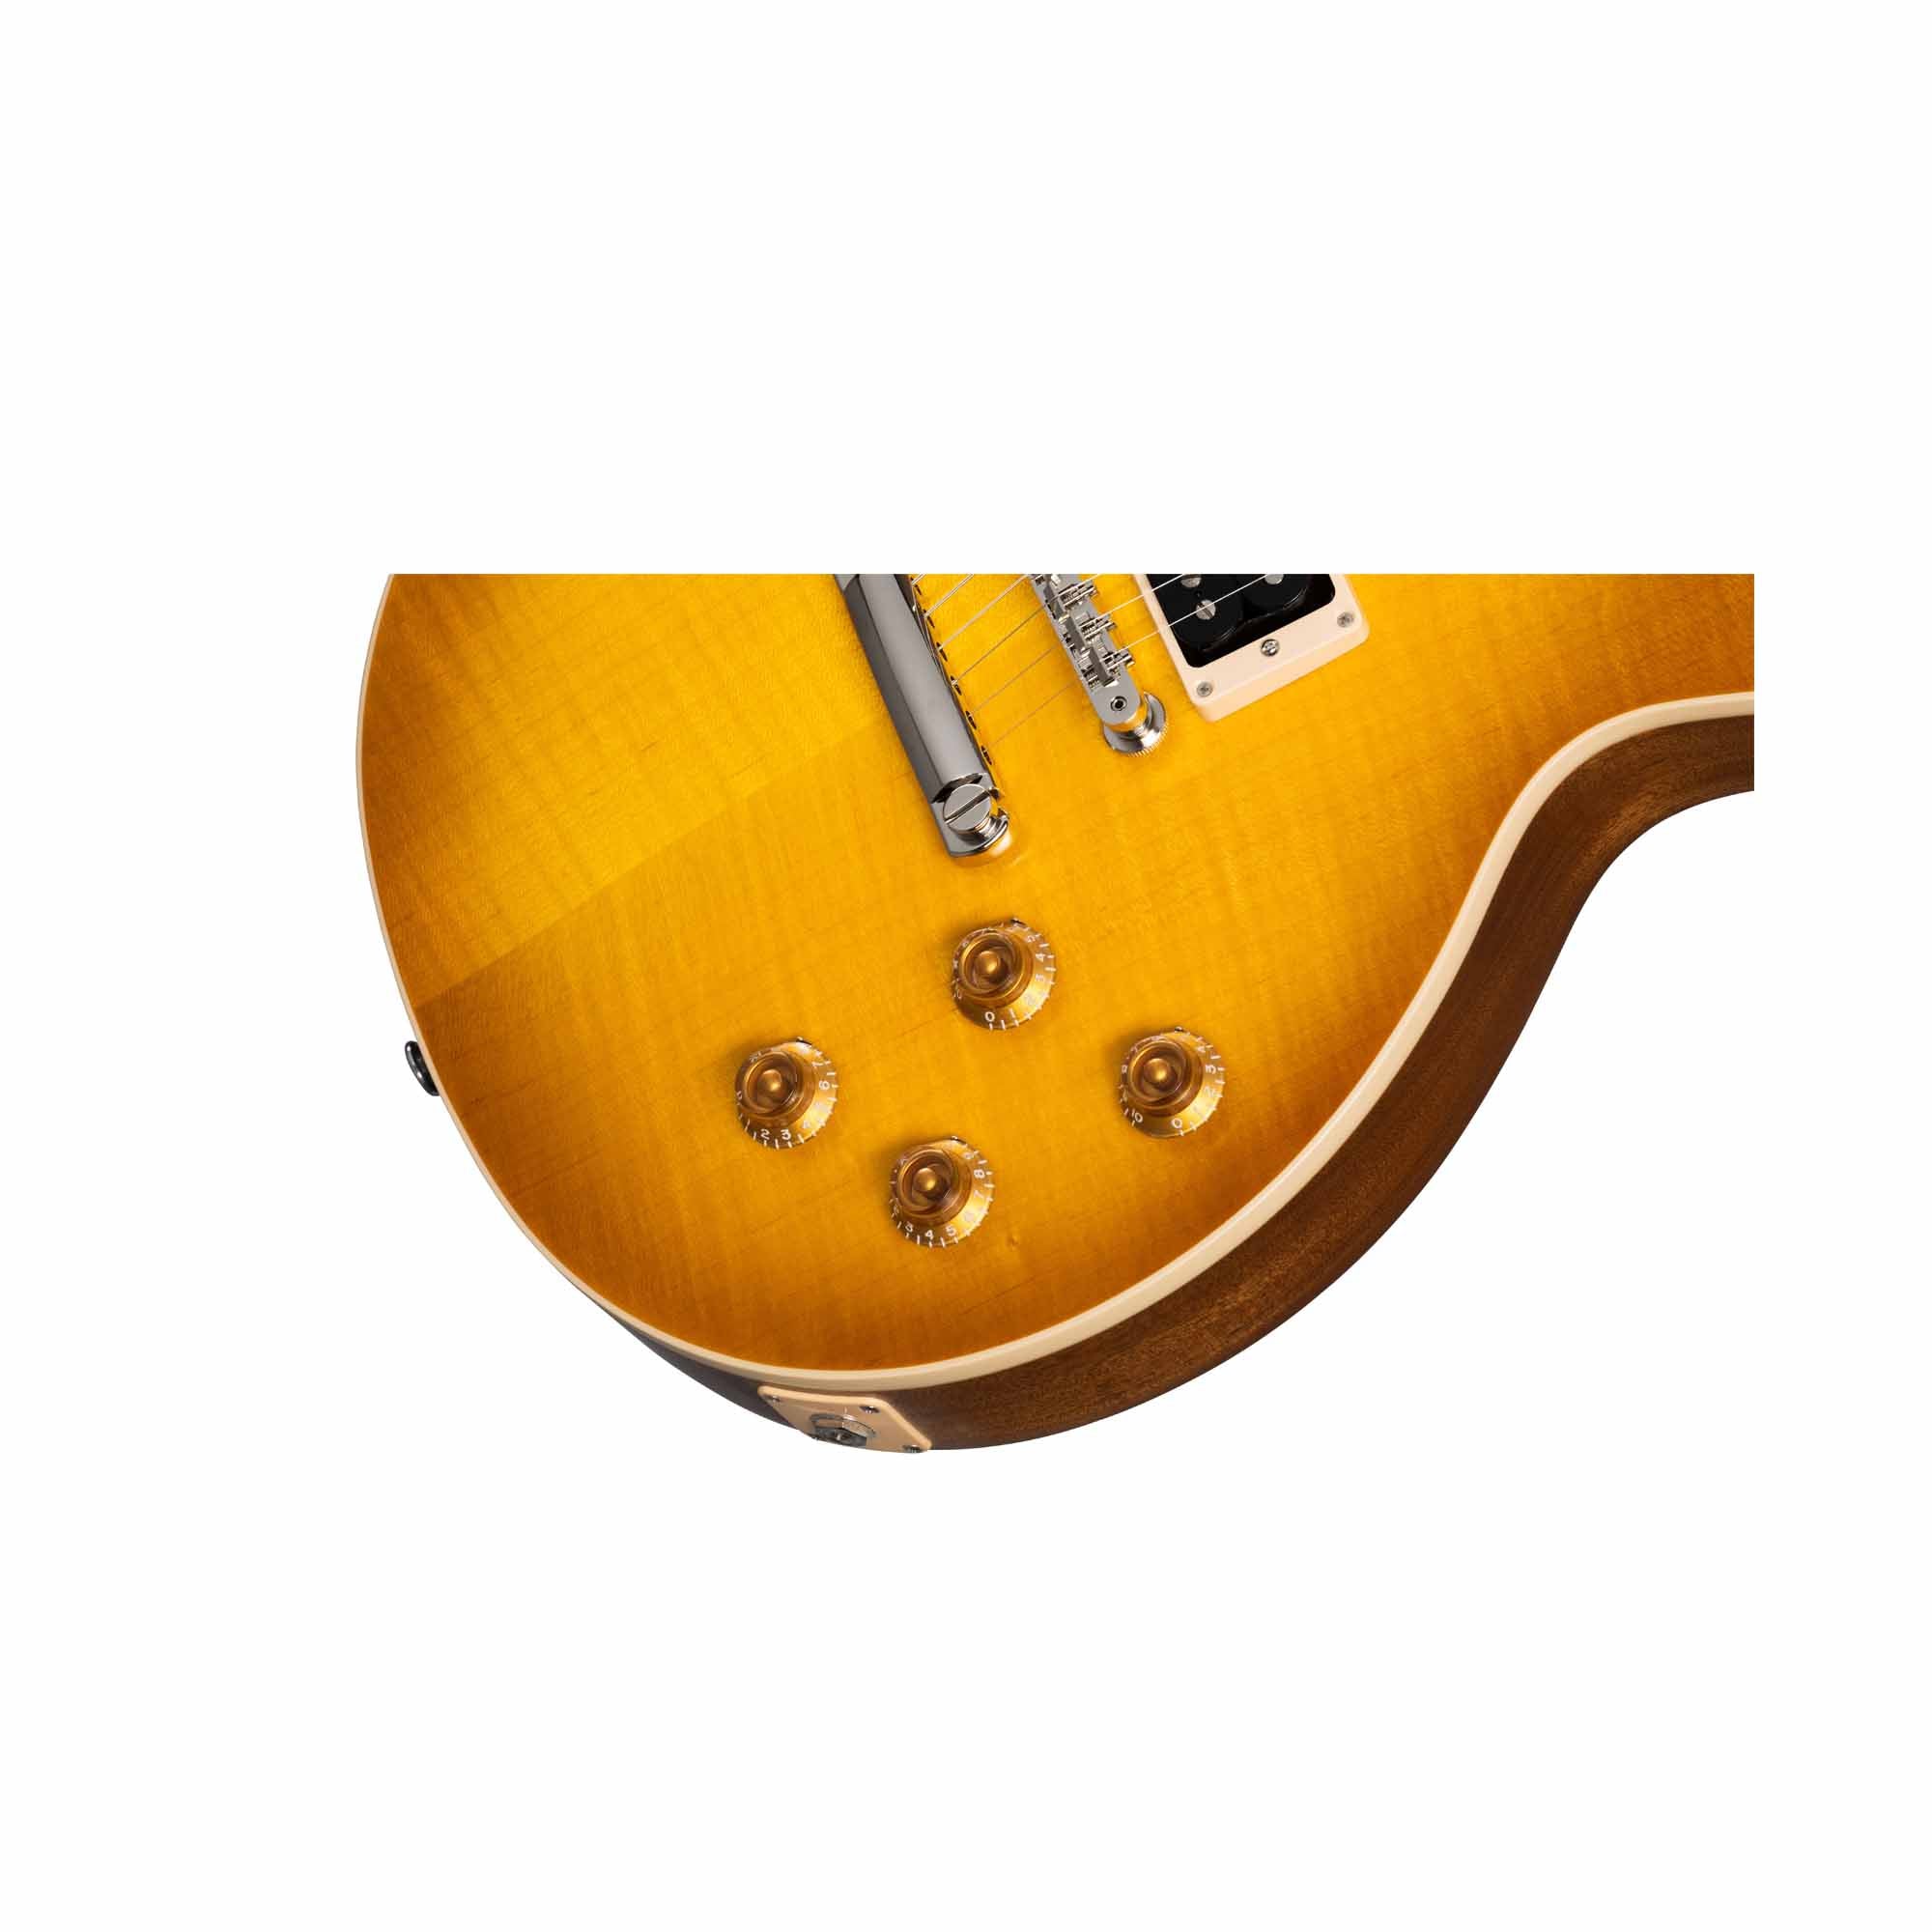 Gibson LPS5F00FHNH1 Les Paul Standard '50s Faded Electric Guitar - Vintage Honey Burst